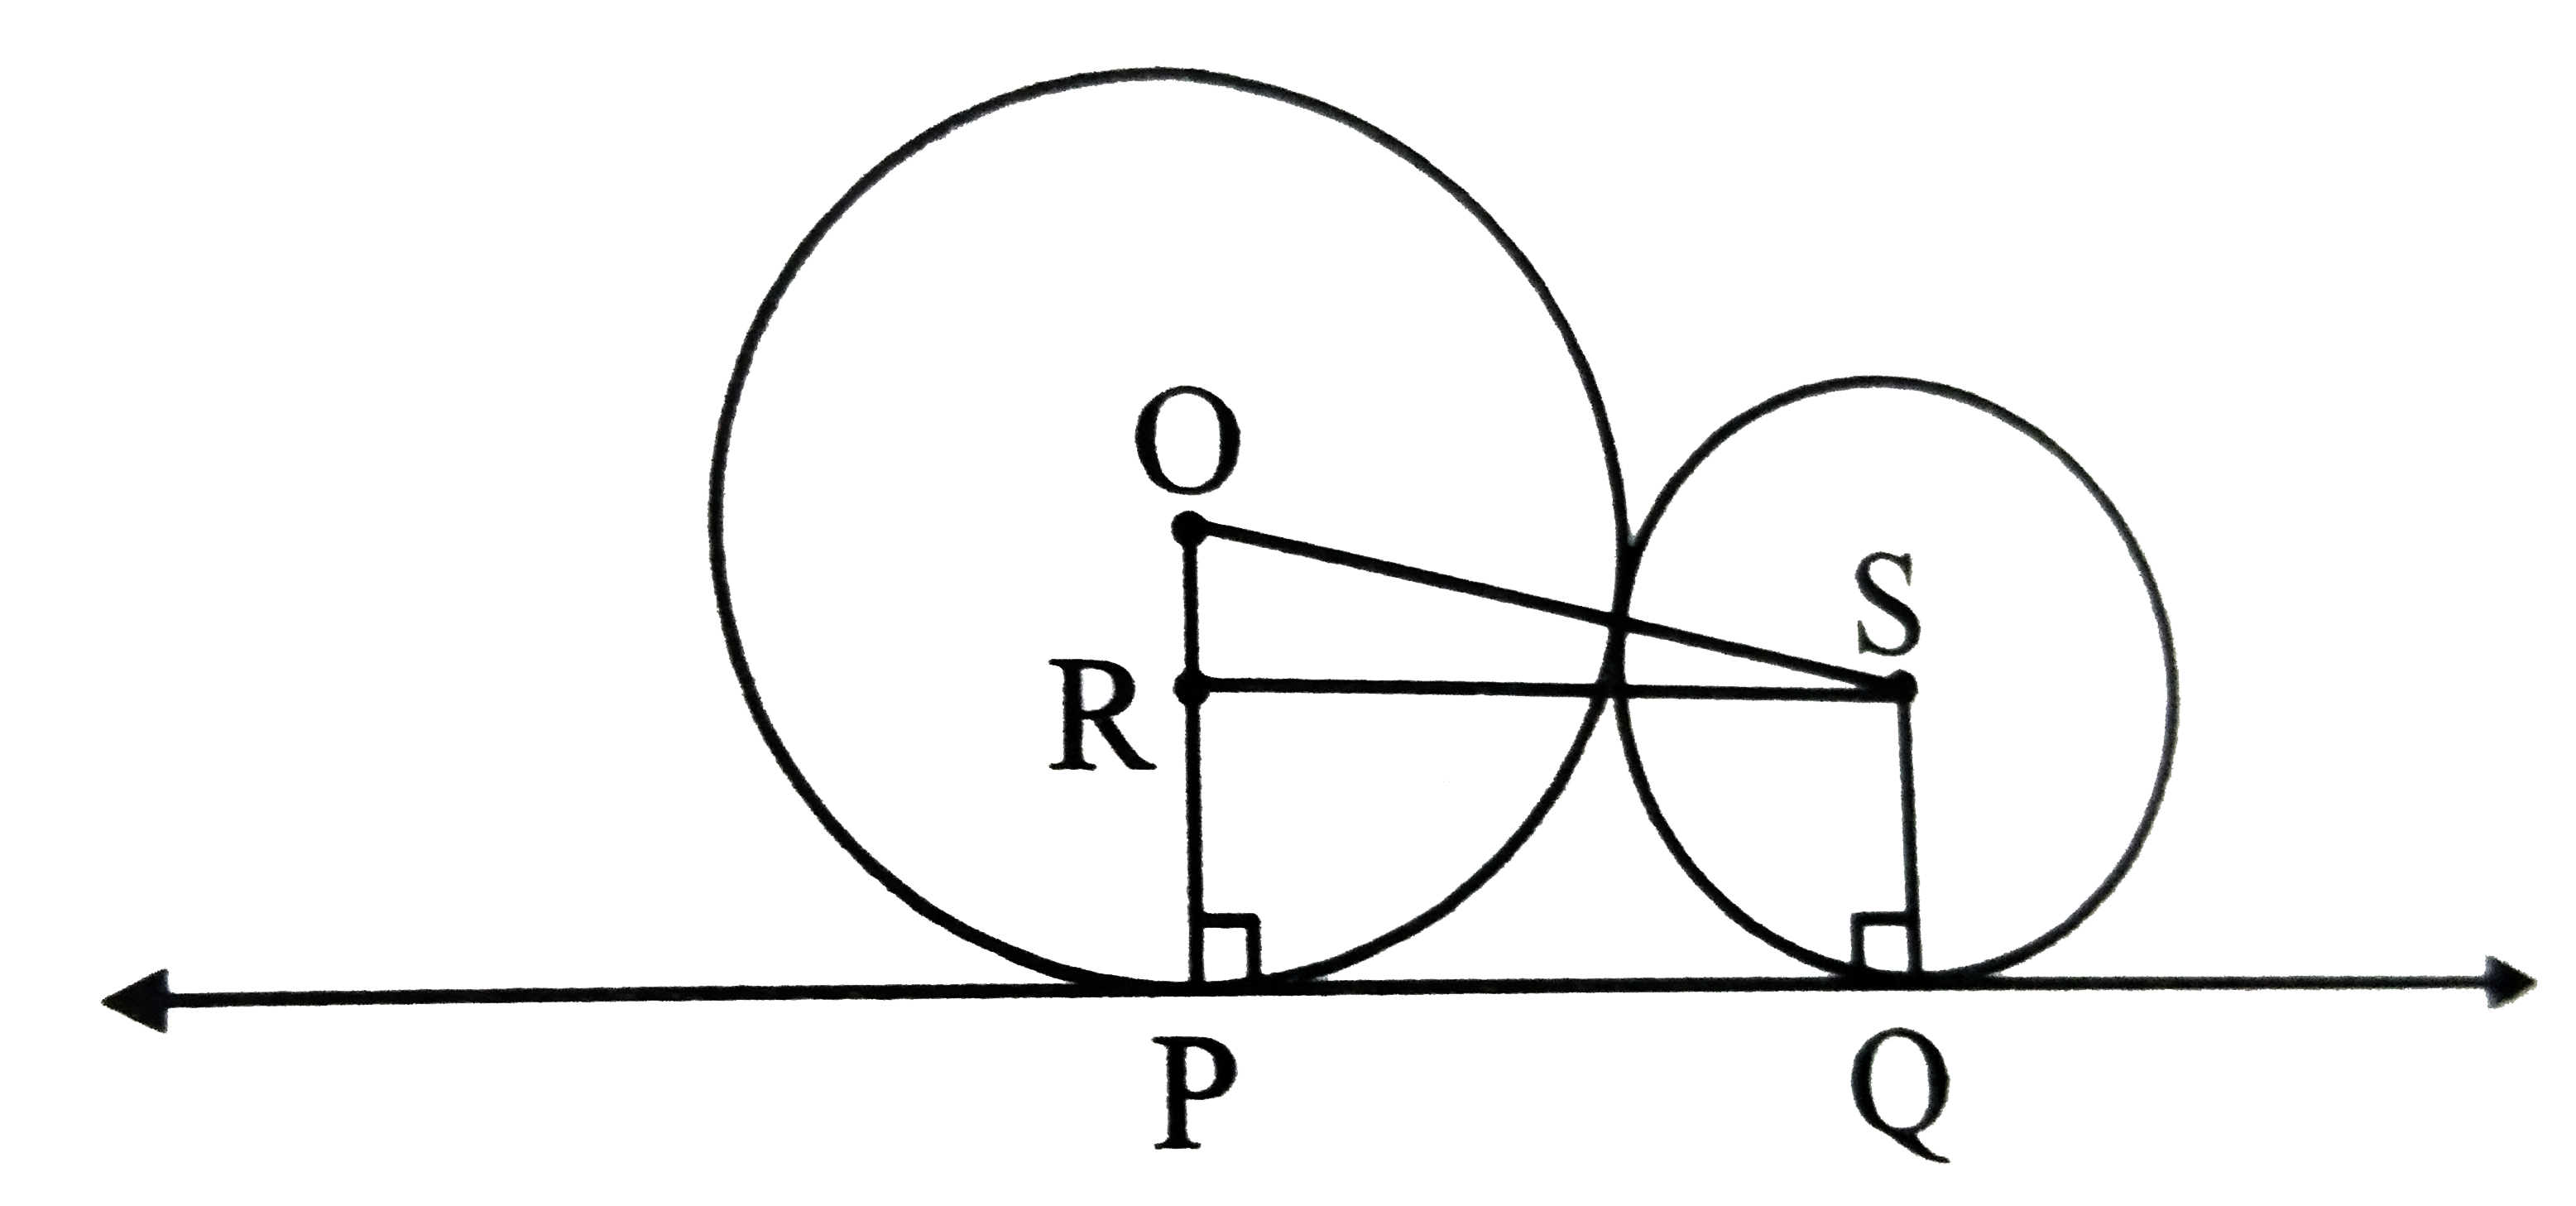 In the adjoining figure , line PQ is a common tangent to  the externally touching circles and the radii of two circles  are 25cm and 9cm. Find the length of the common tangent  segment of these circles.